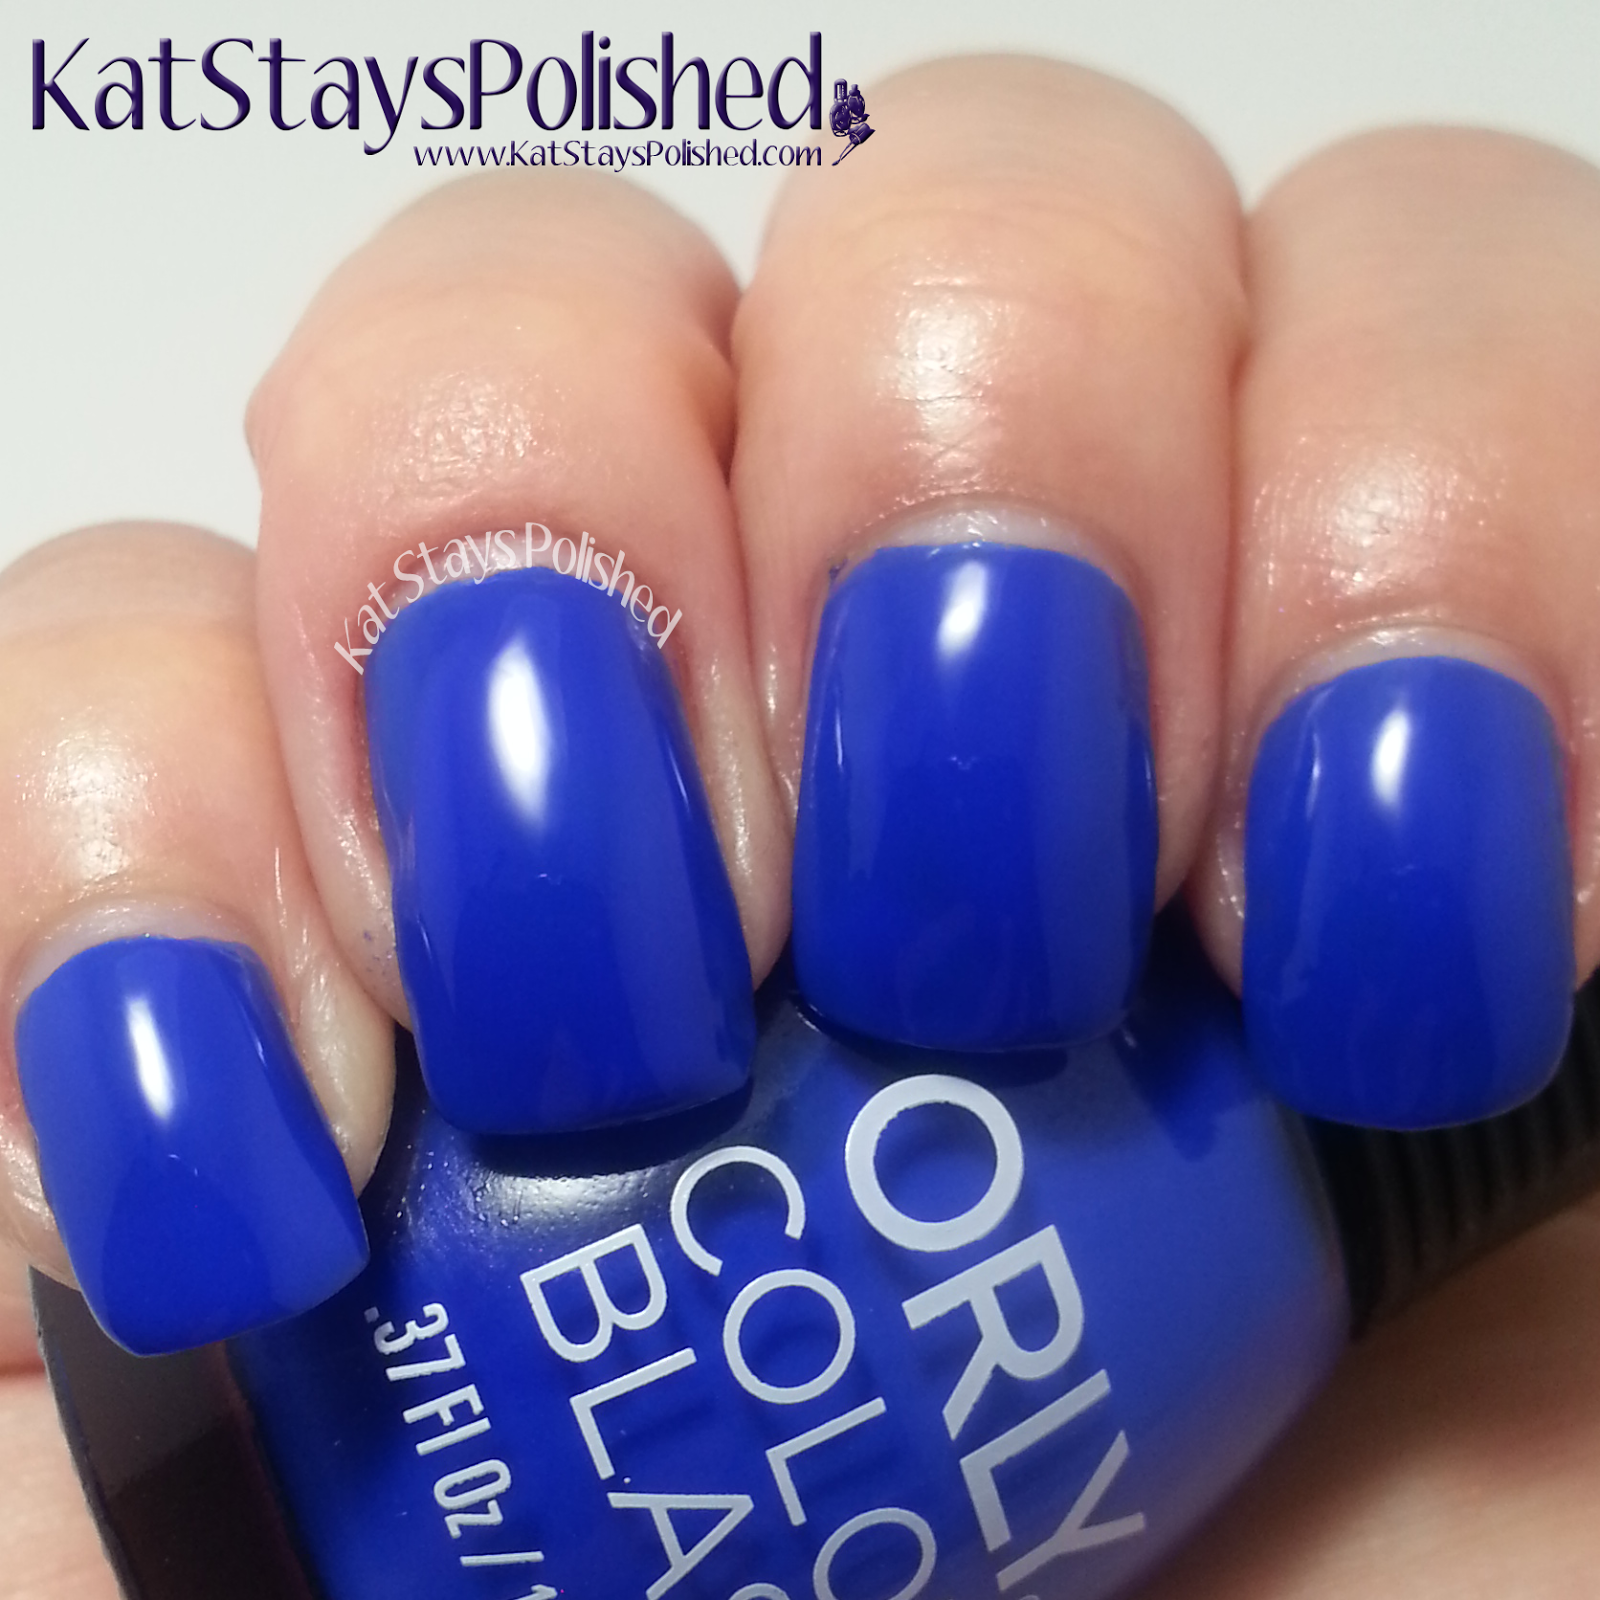 Orly Color Blast - Disney's Frozen Elsa Collection - A Happy...Puddle | Kat Stays Polished